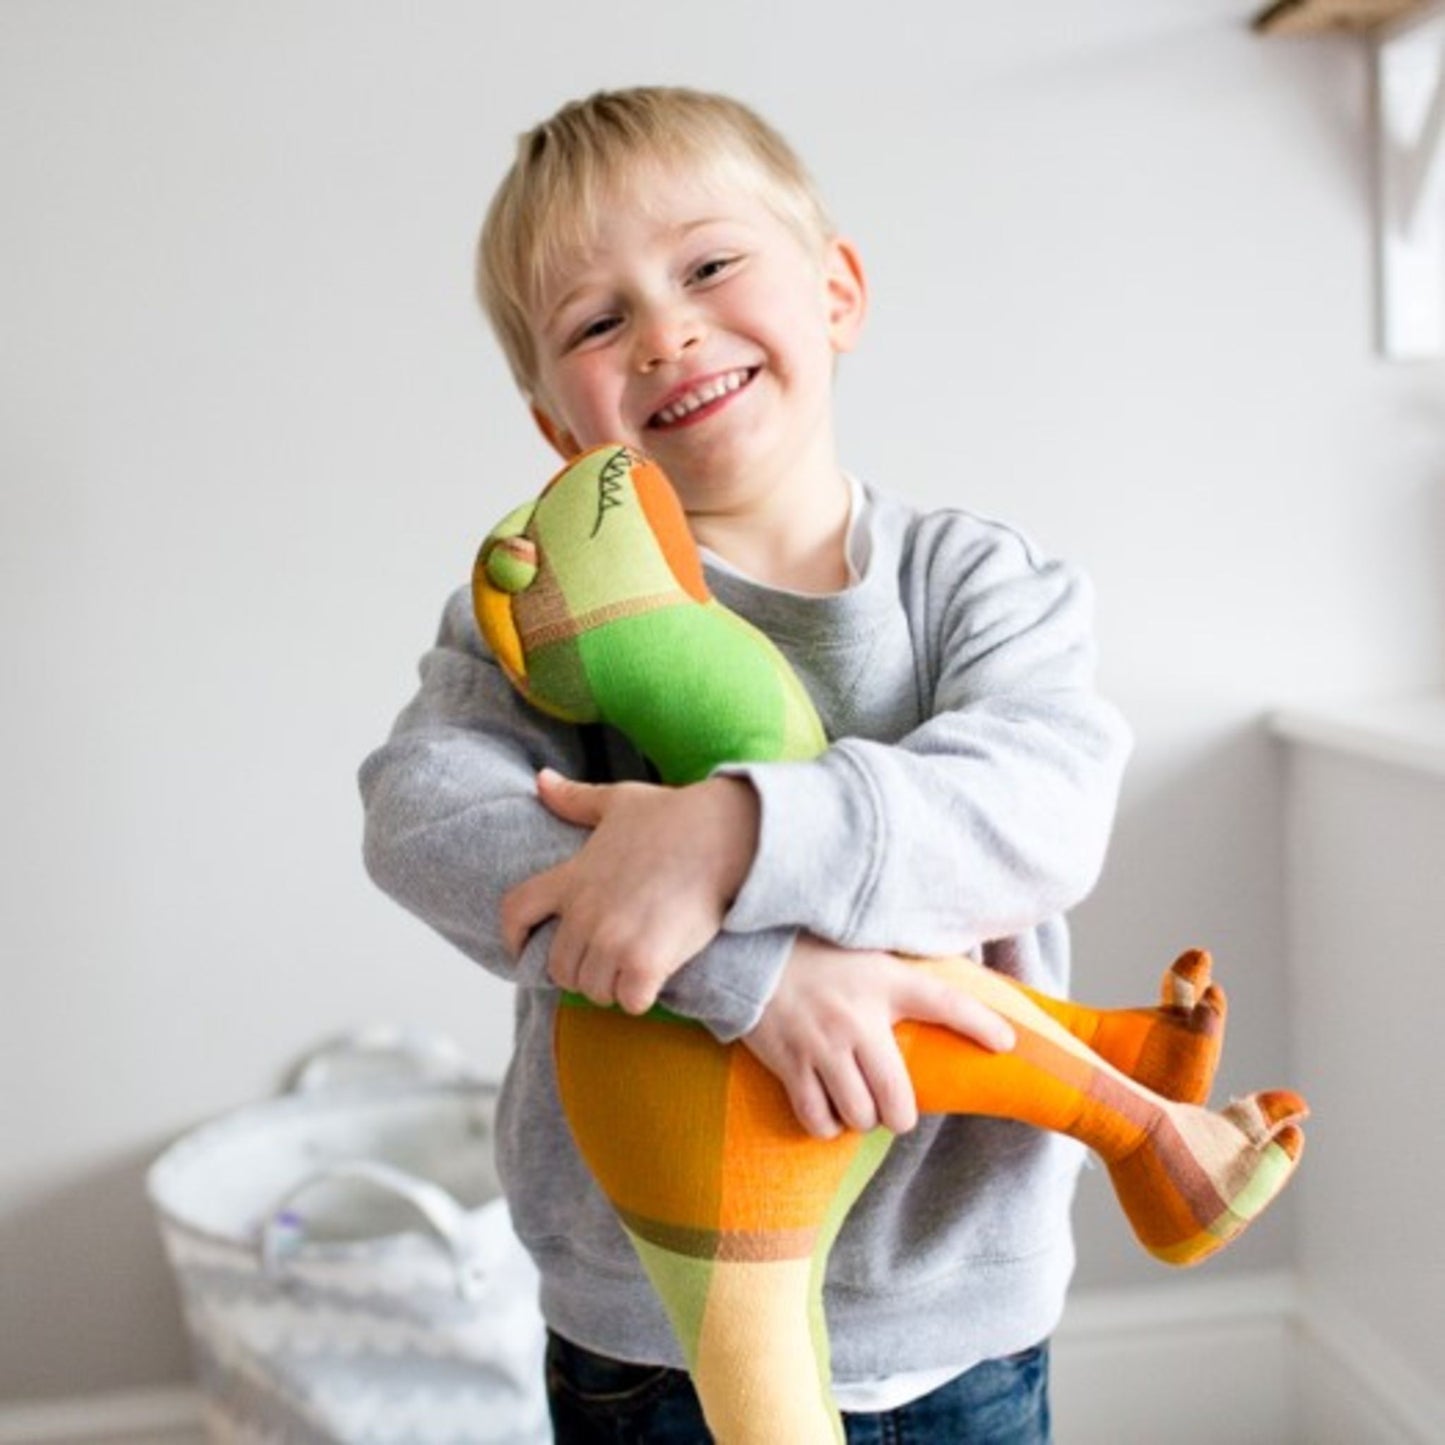 Dinosaur soft toy | Fair Trade toys - cotton toy held by child